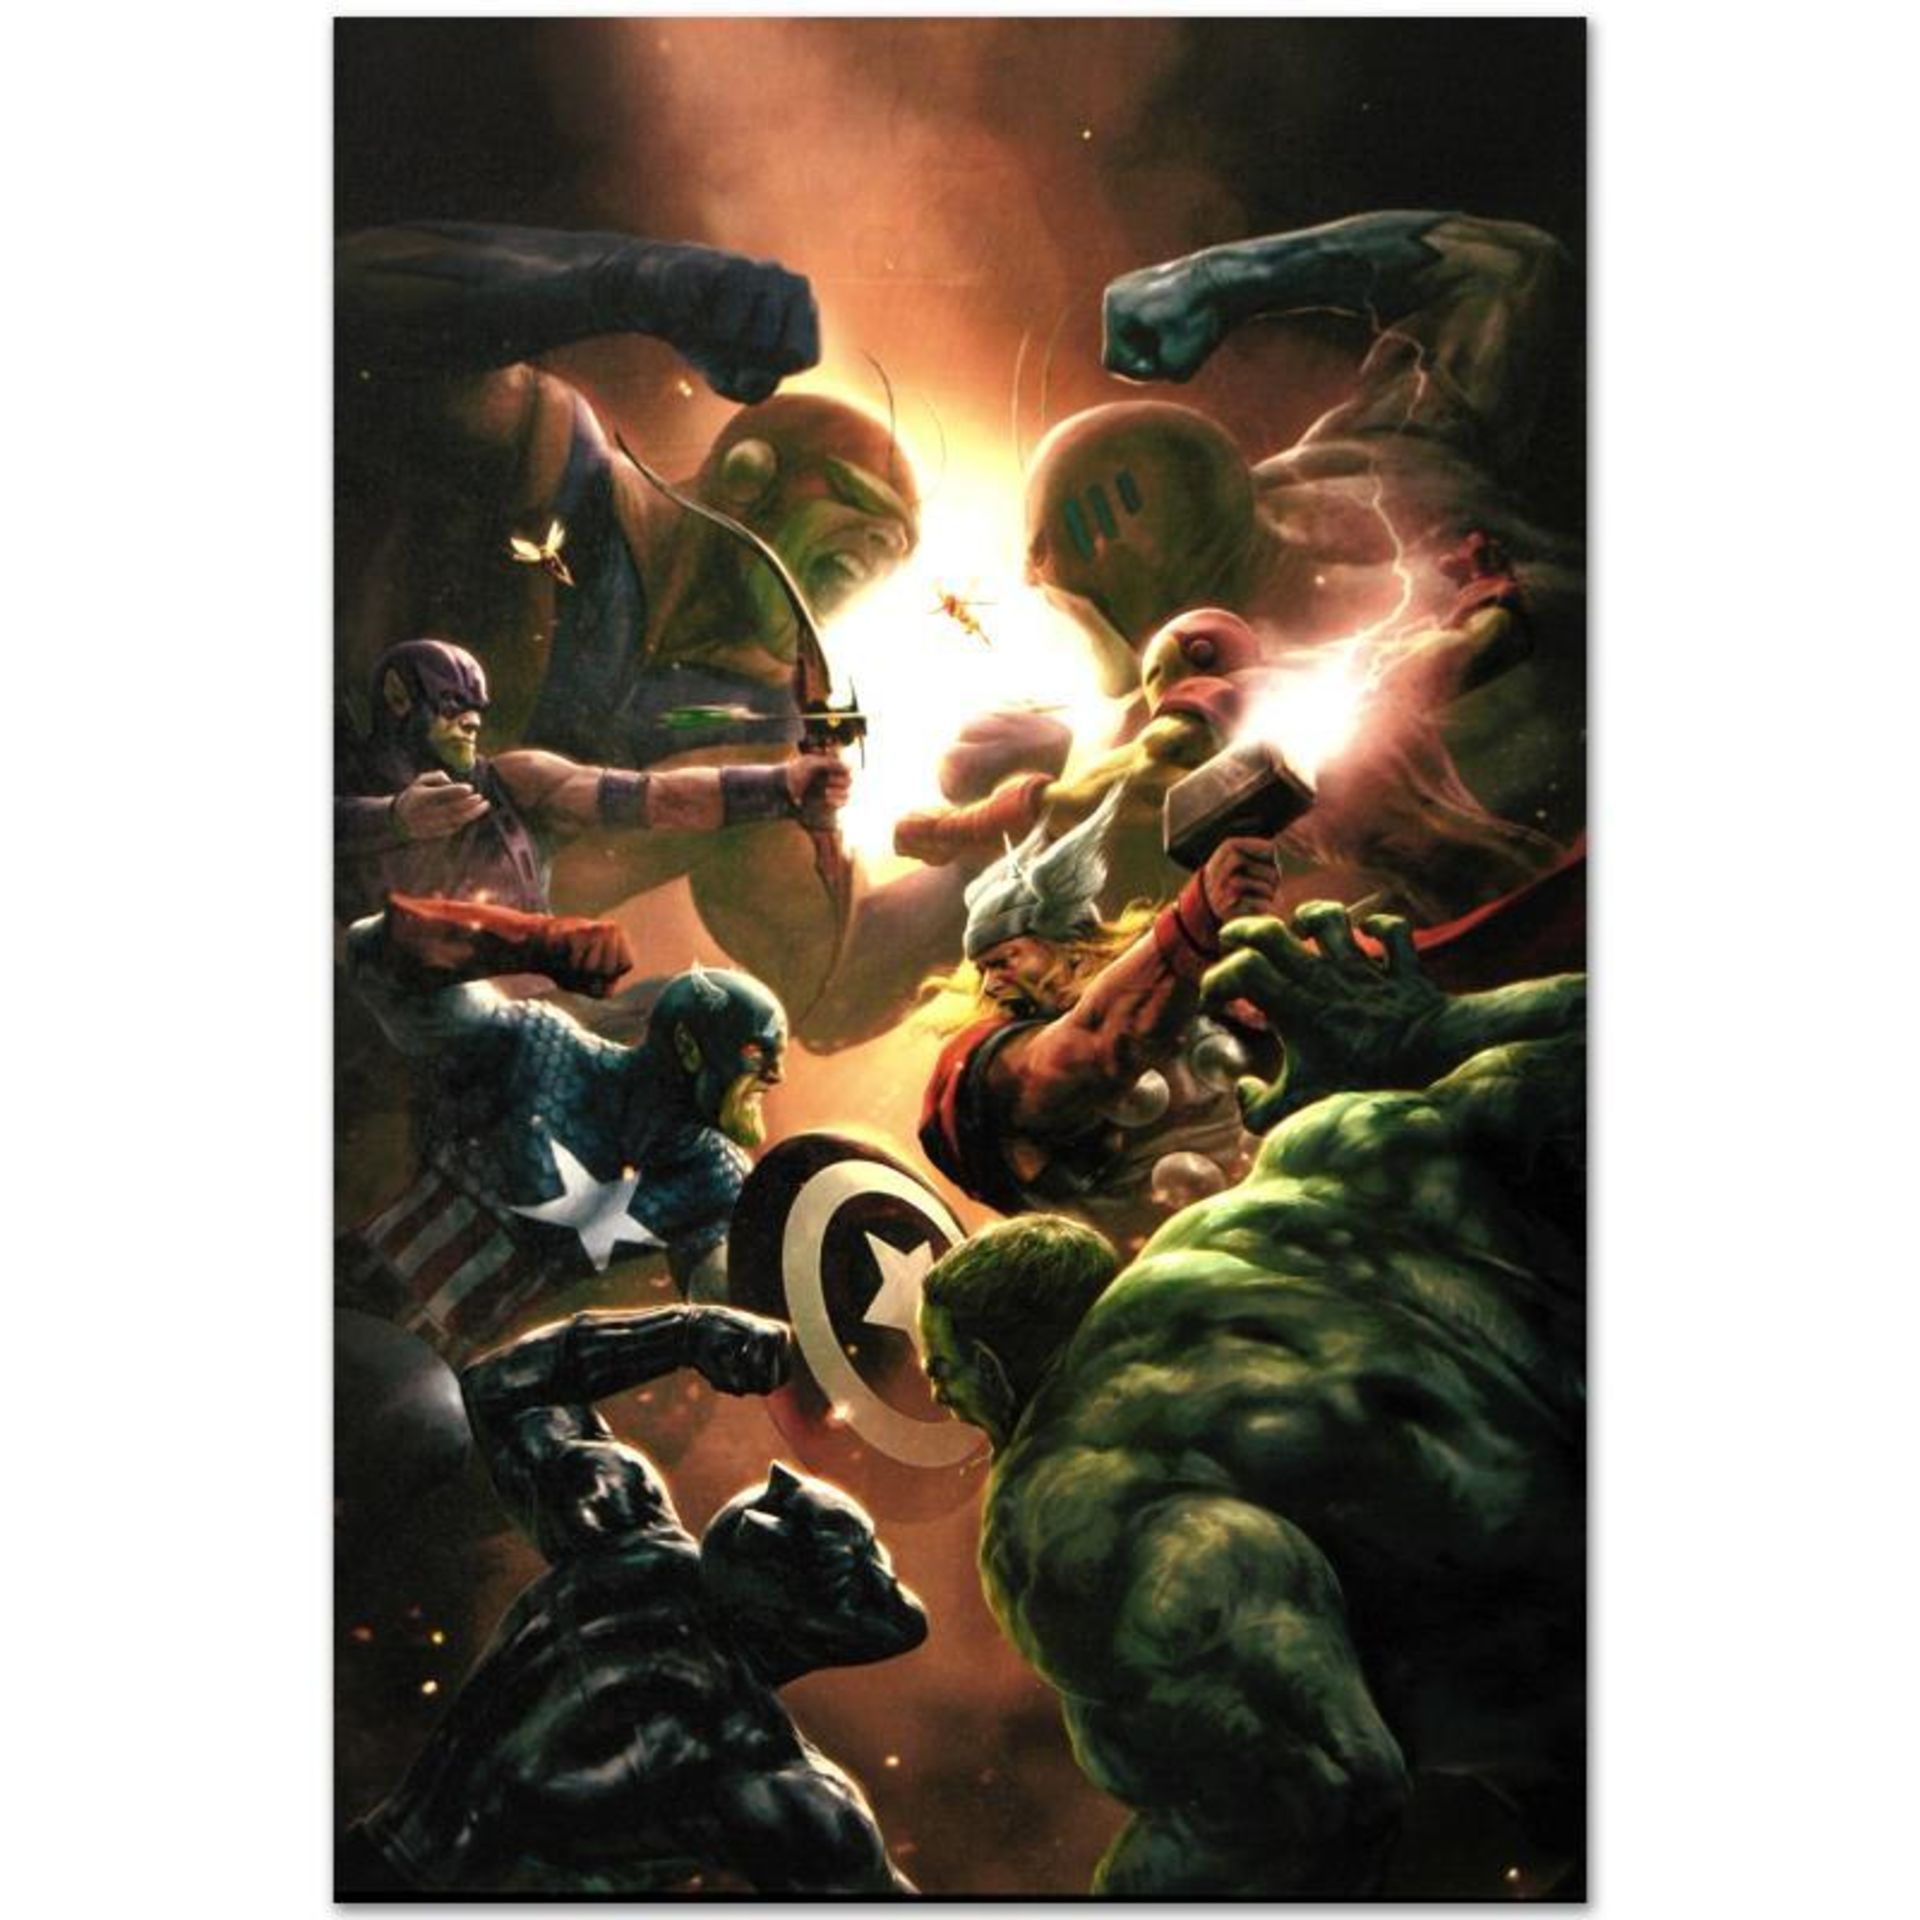 Marvel Comics "New Avengers #43" Numbered Limited Edition Giclee on Canvas by Al